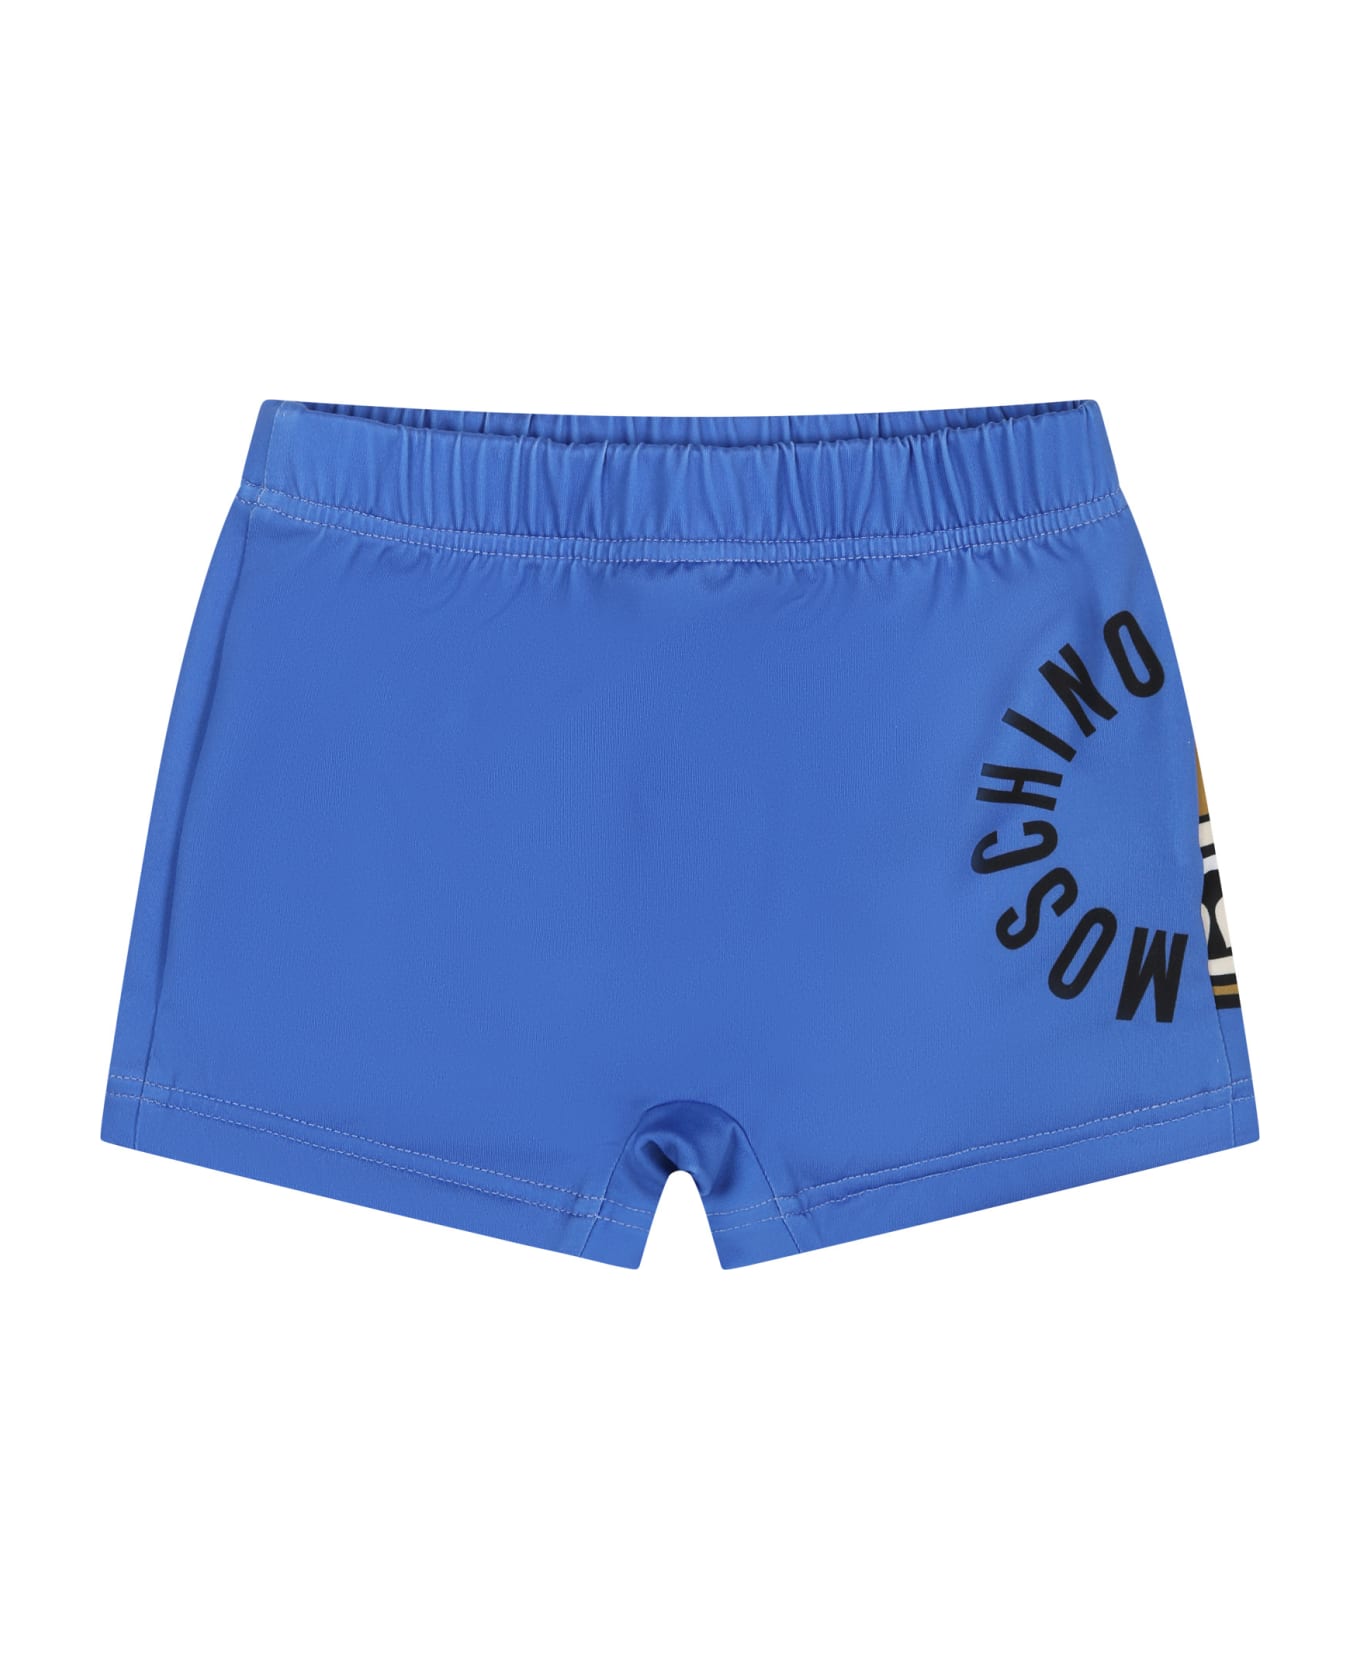 Moschino Light Blue Swim Shorts For Baby Boy With Teddy Bear And Logo - Light Blue